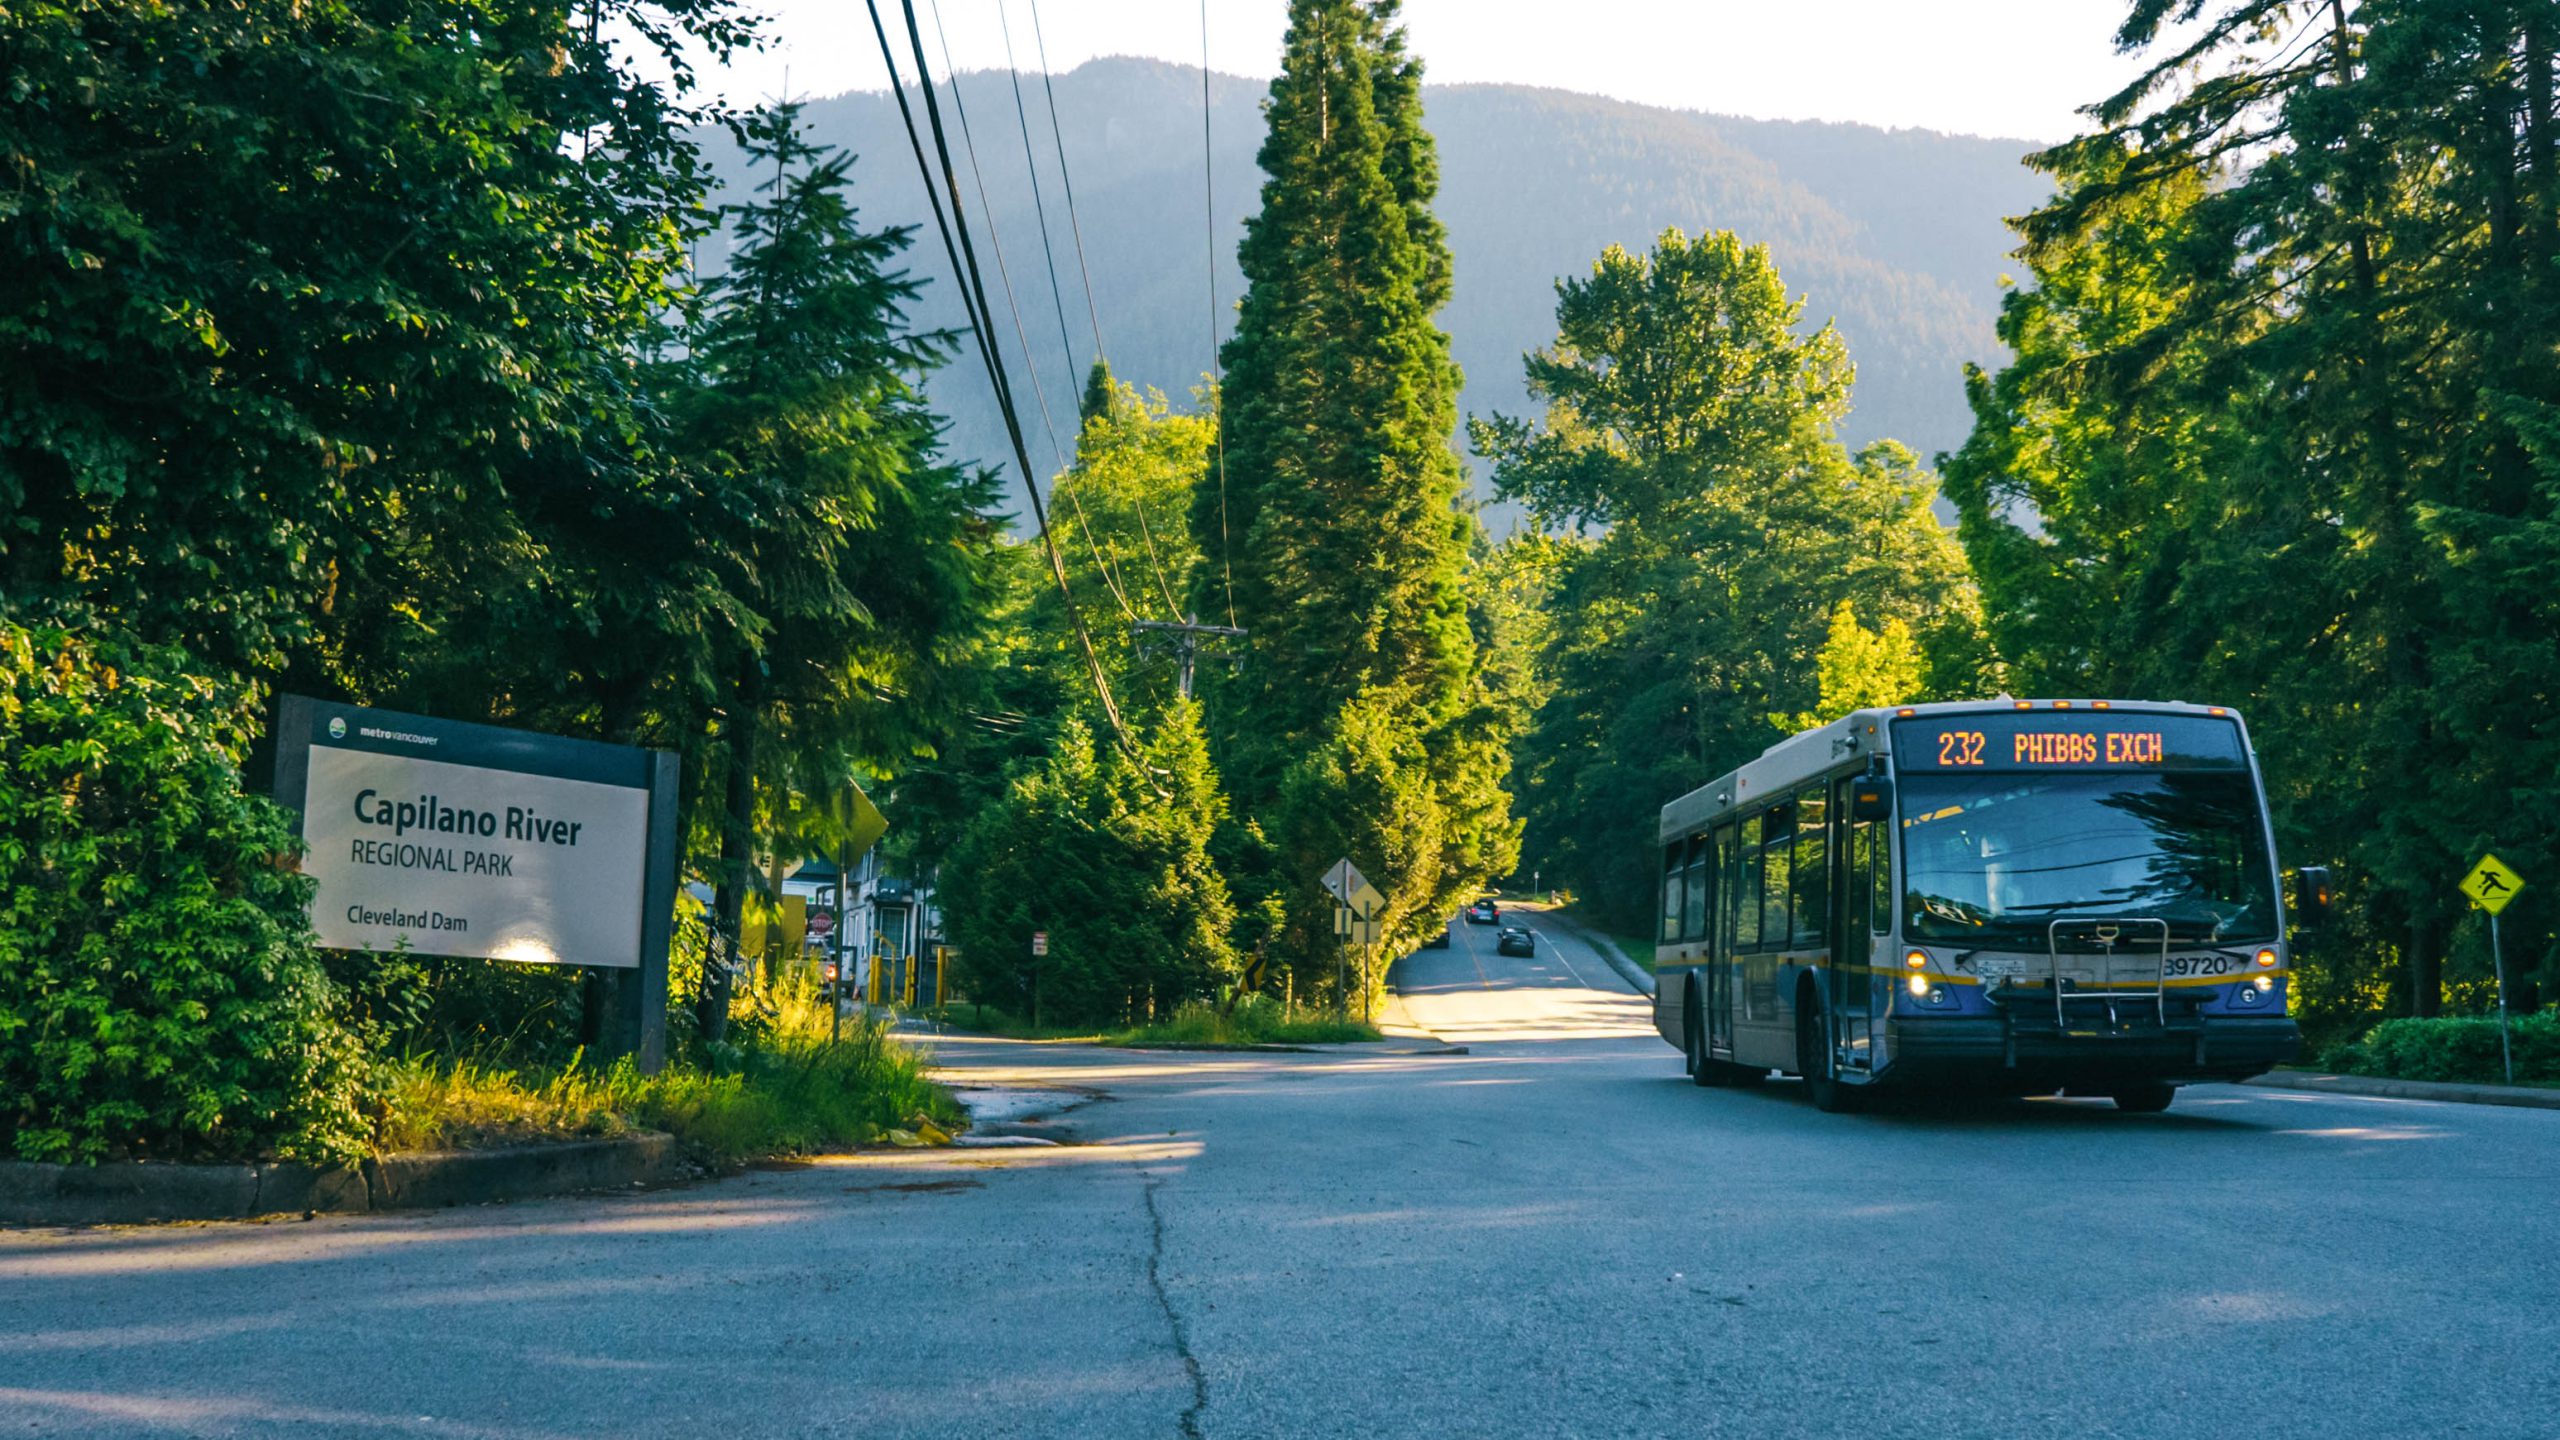 232 Phibbs Exchange bus passing by the Capilano River Regional Park sign